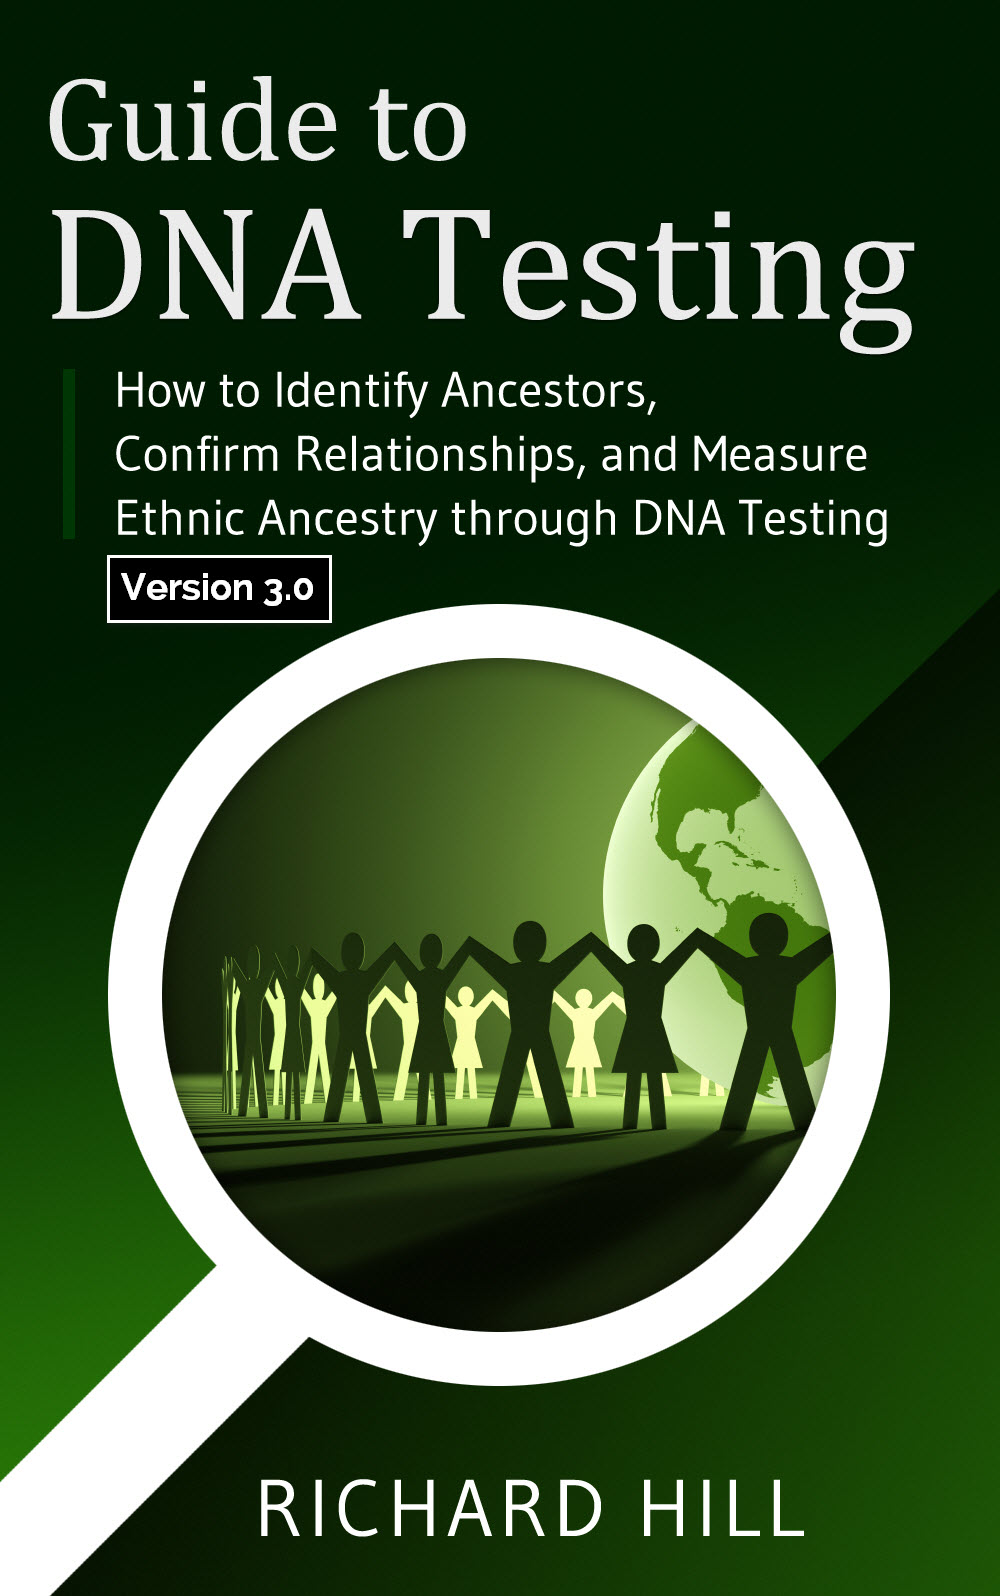 guide-to-dna-testing-free-ebook-for-a-limited-time-on-amazon-kindle-wise-media-group-prlog